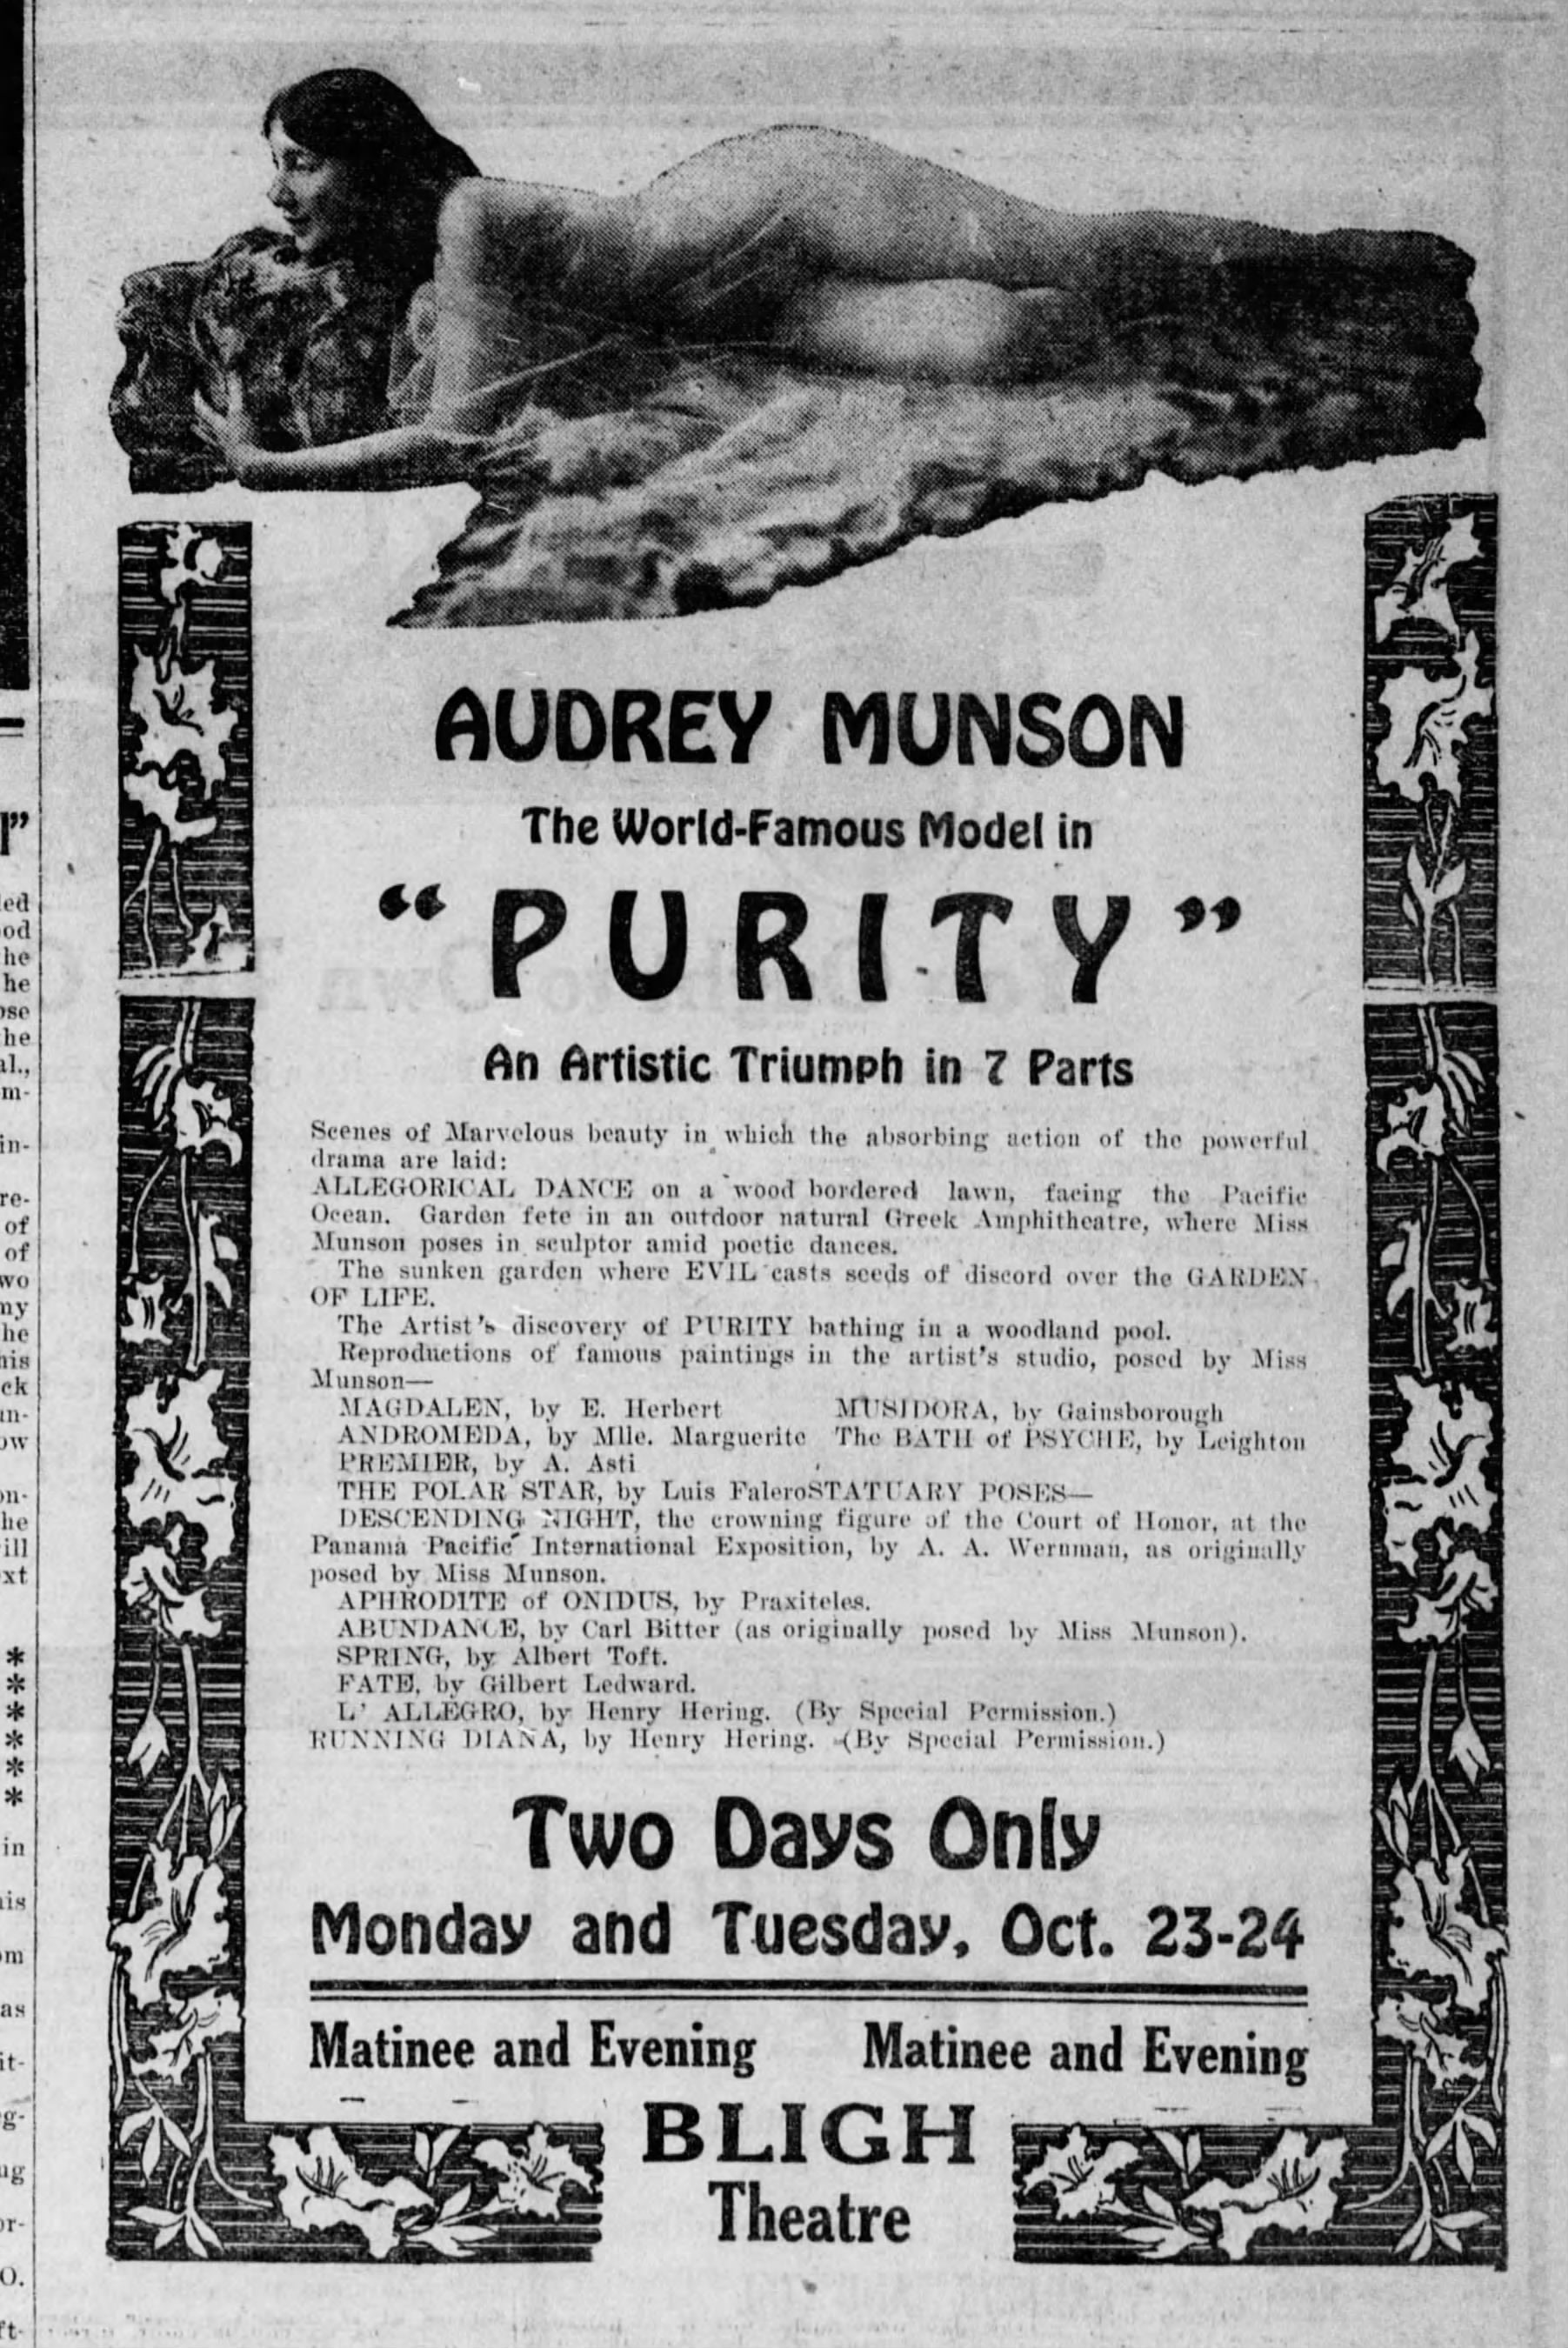 Audrey Munson movie at the Bligh, 1916